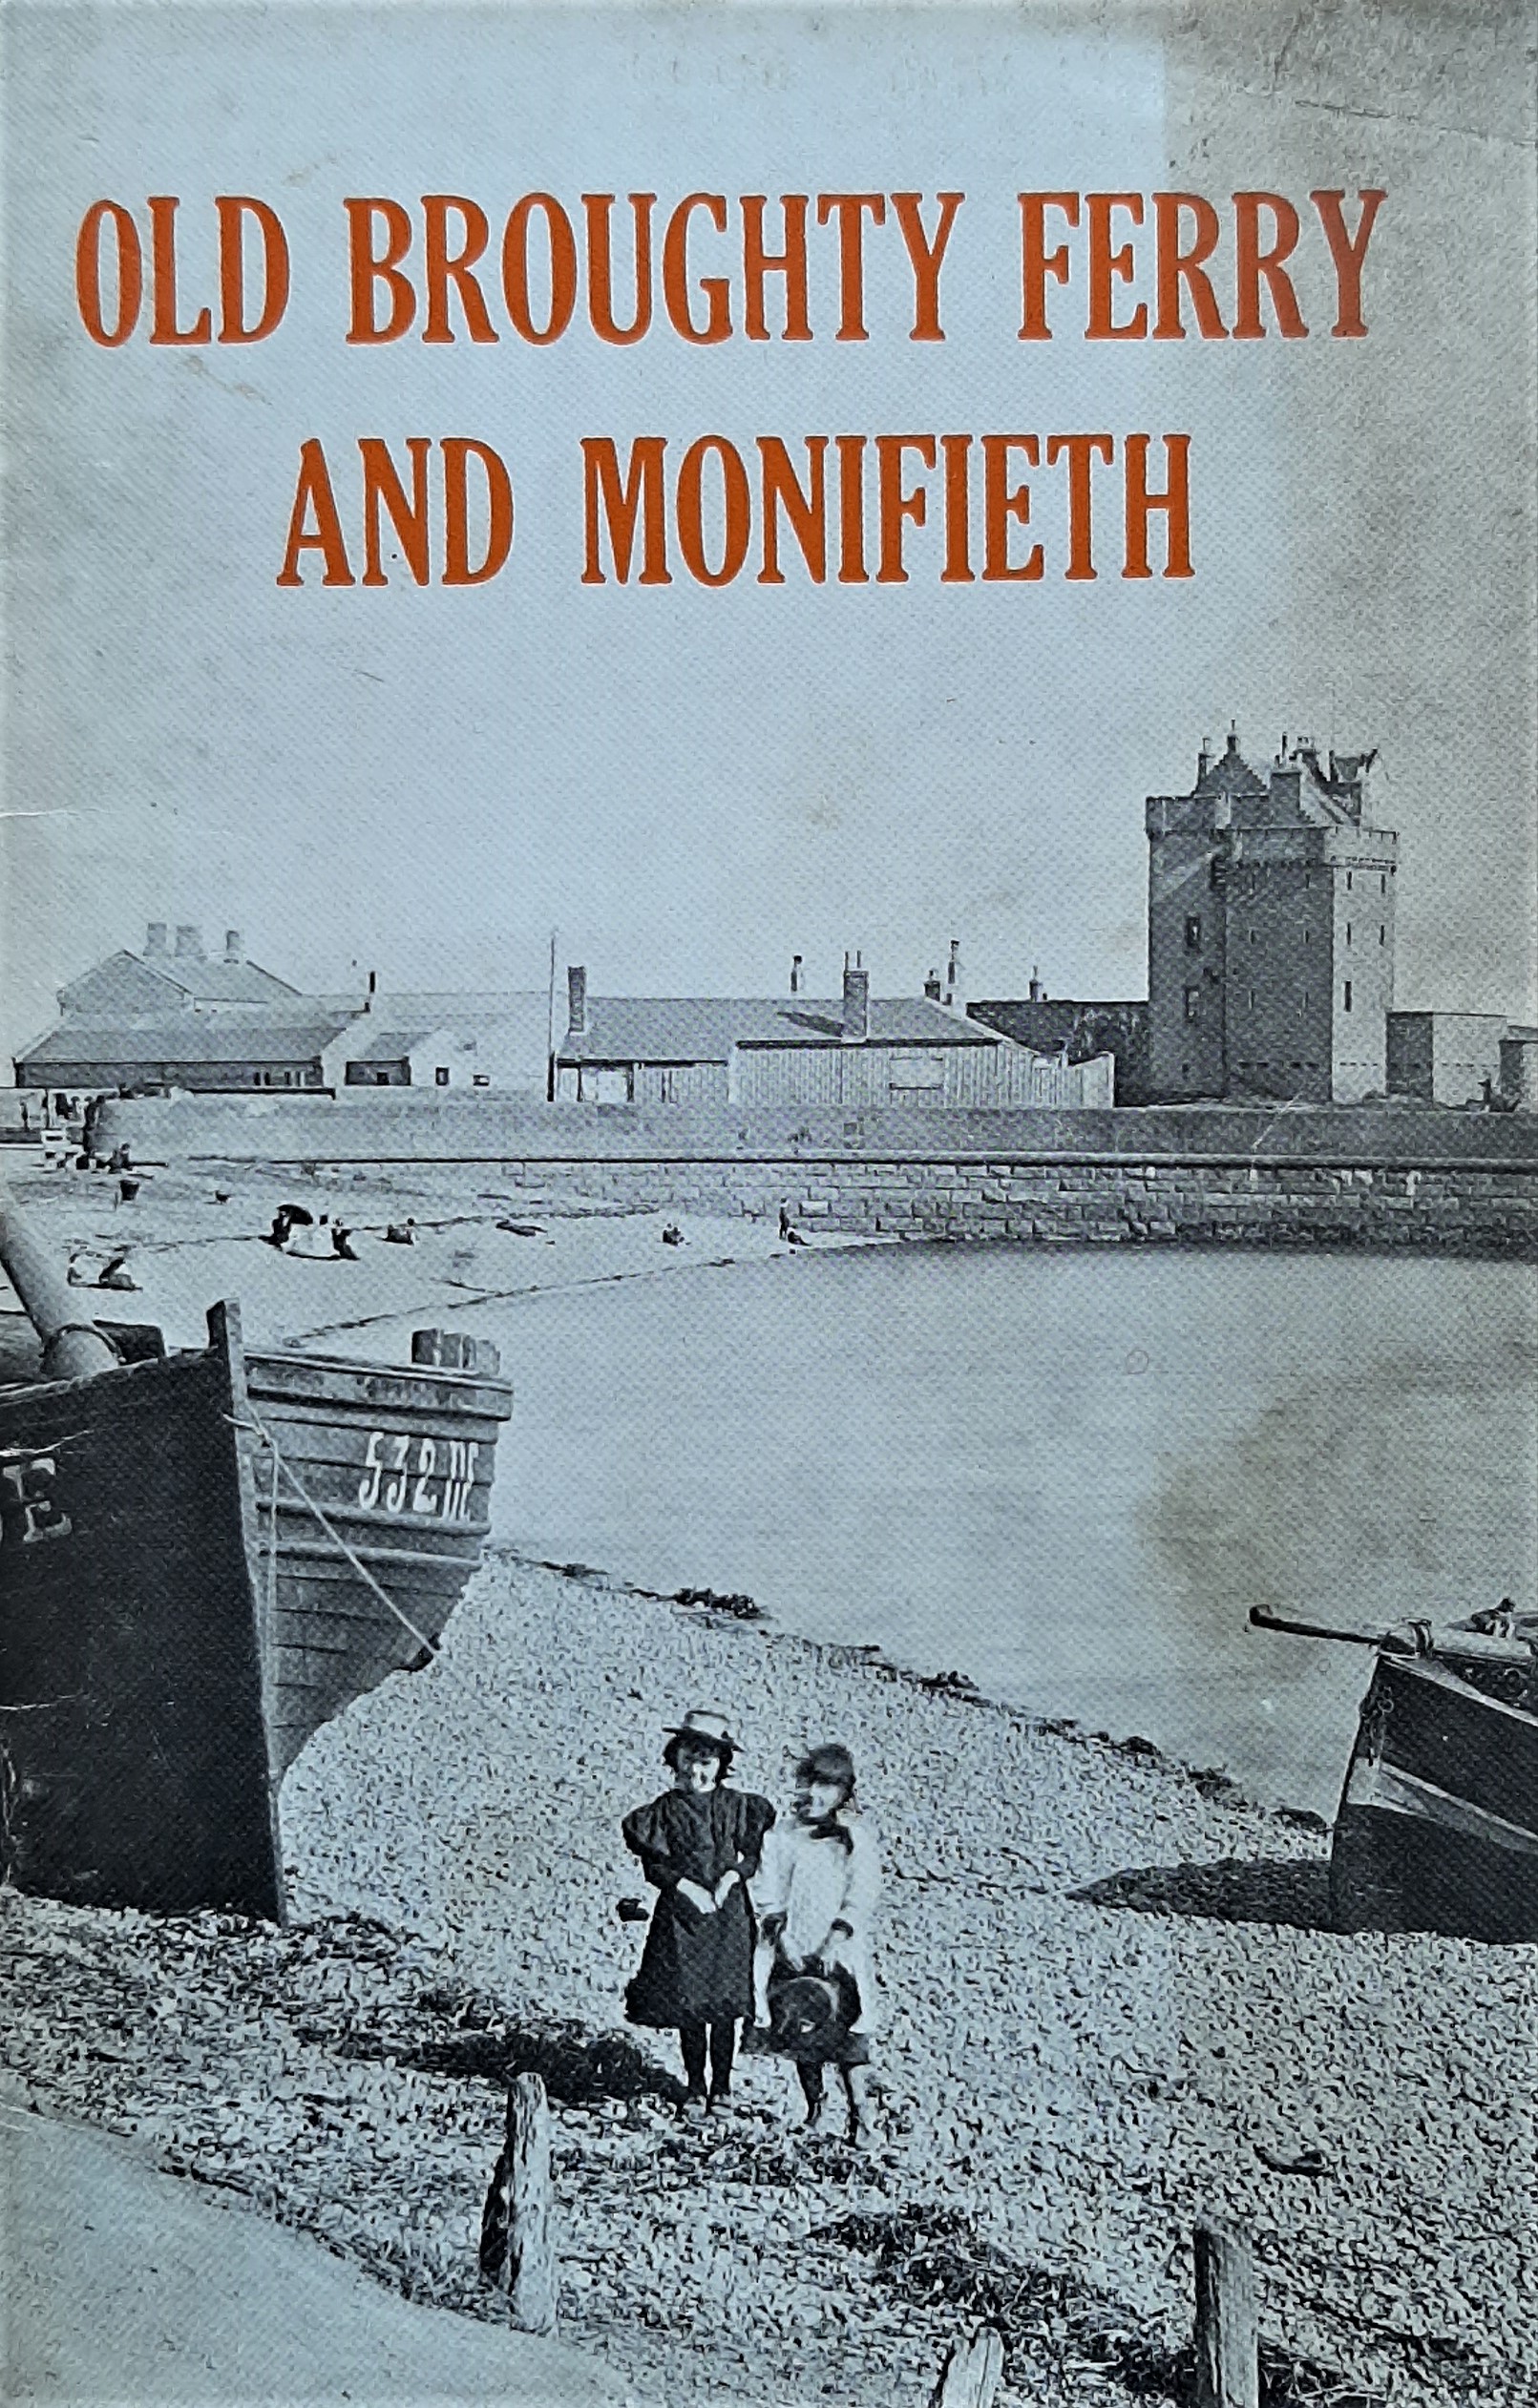 “Old Broughty Ferry and Monifieth” by A W Brotchie & J J Herd (1980)